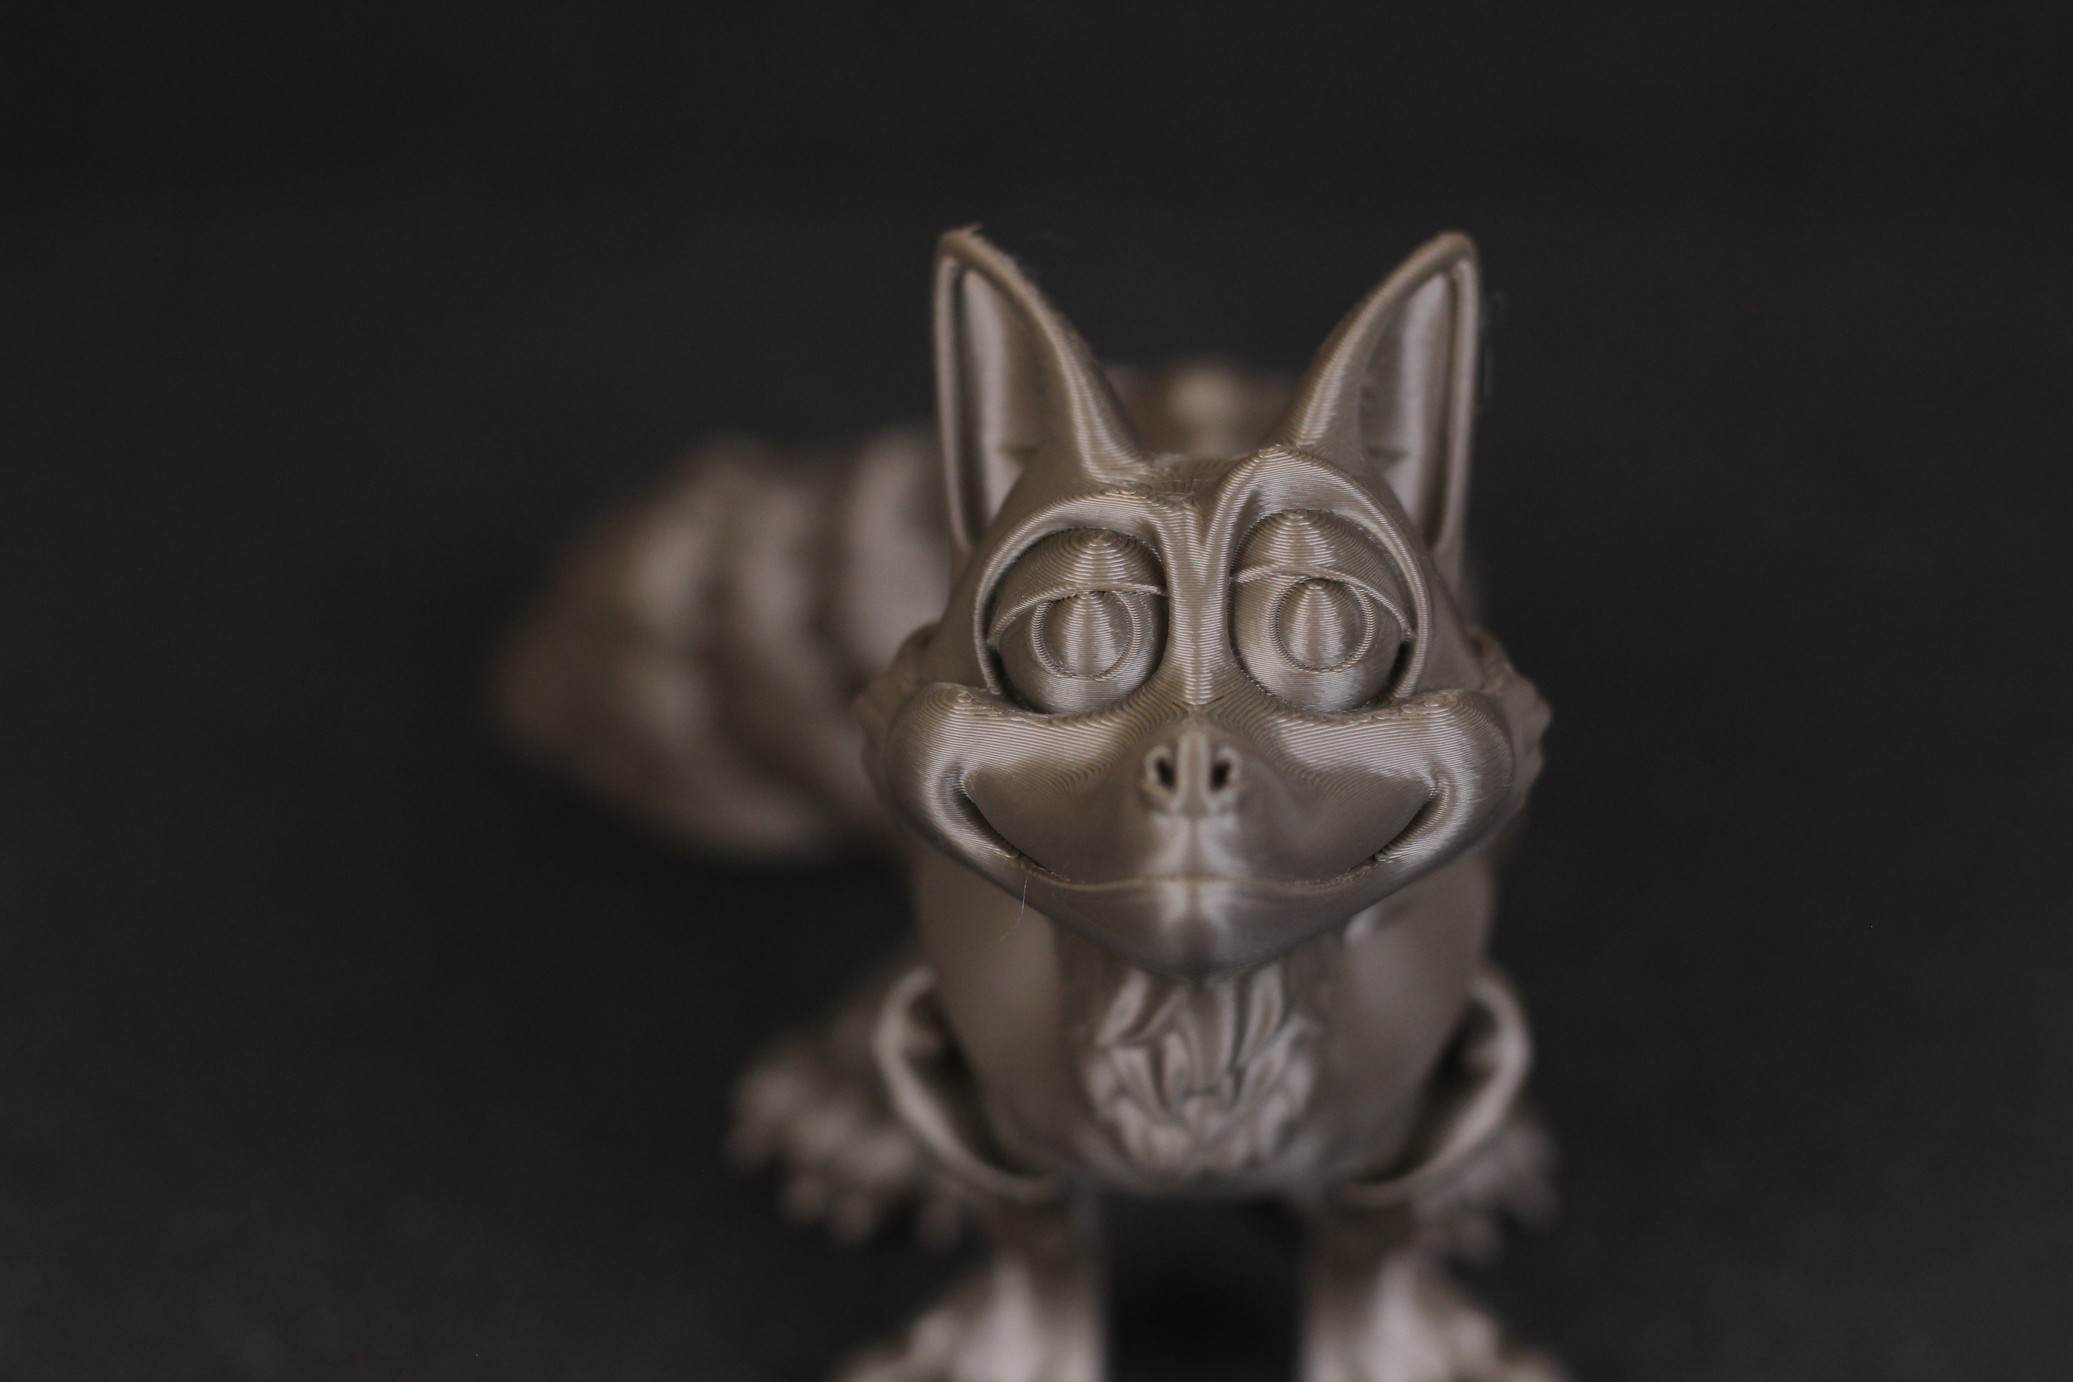 Flexi Fox printed on Ender 3 S1 1 | Creality Ender 3 S1 Review: Almost Perfect